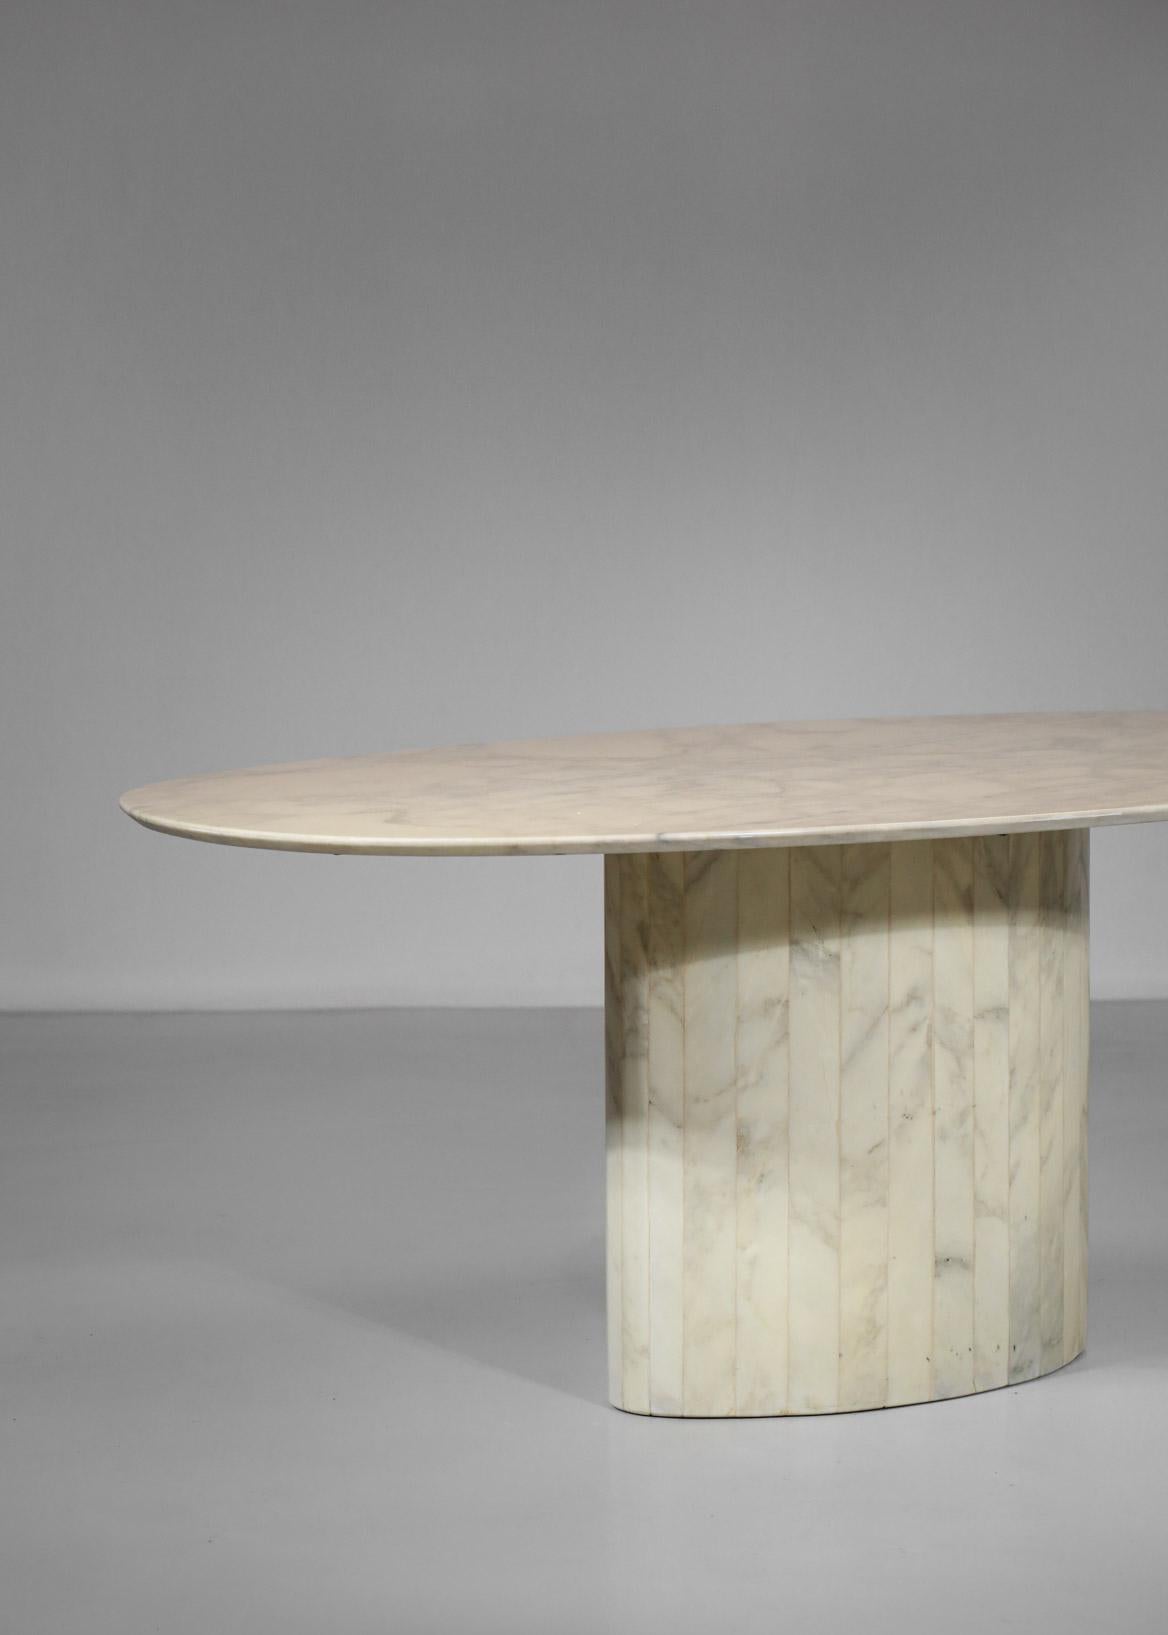 Large oval dining table in varnished Carrara marble from the 1970s.